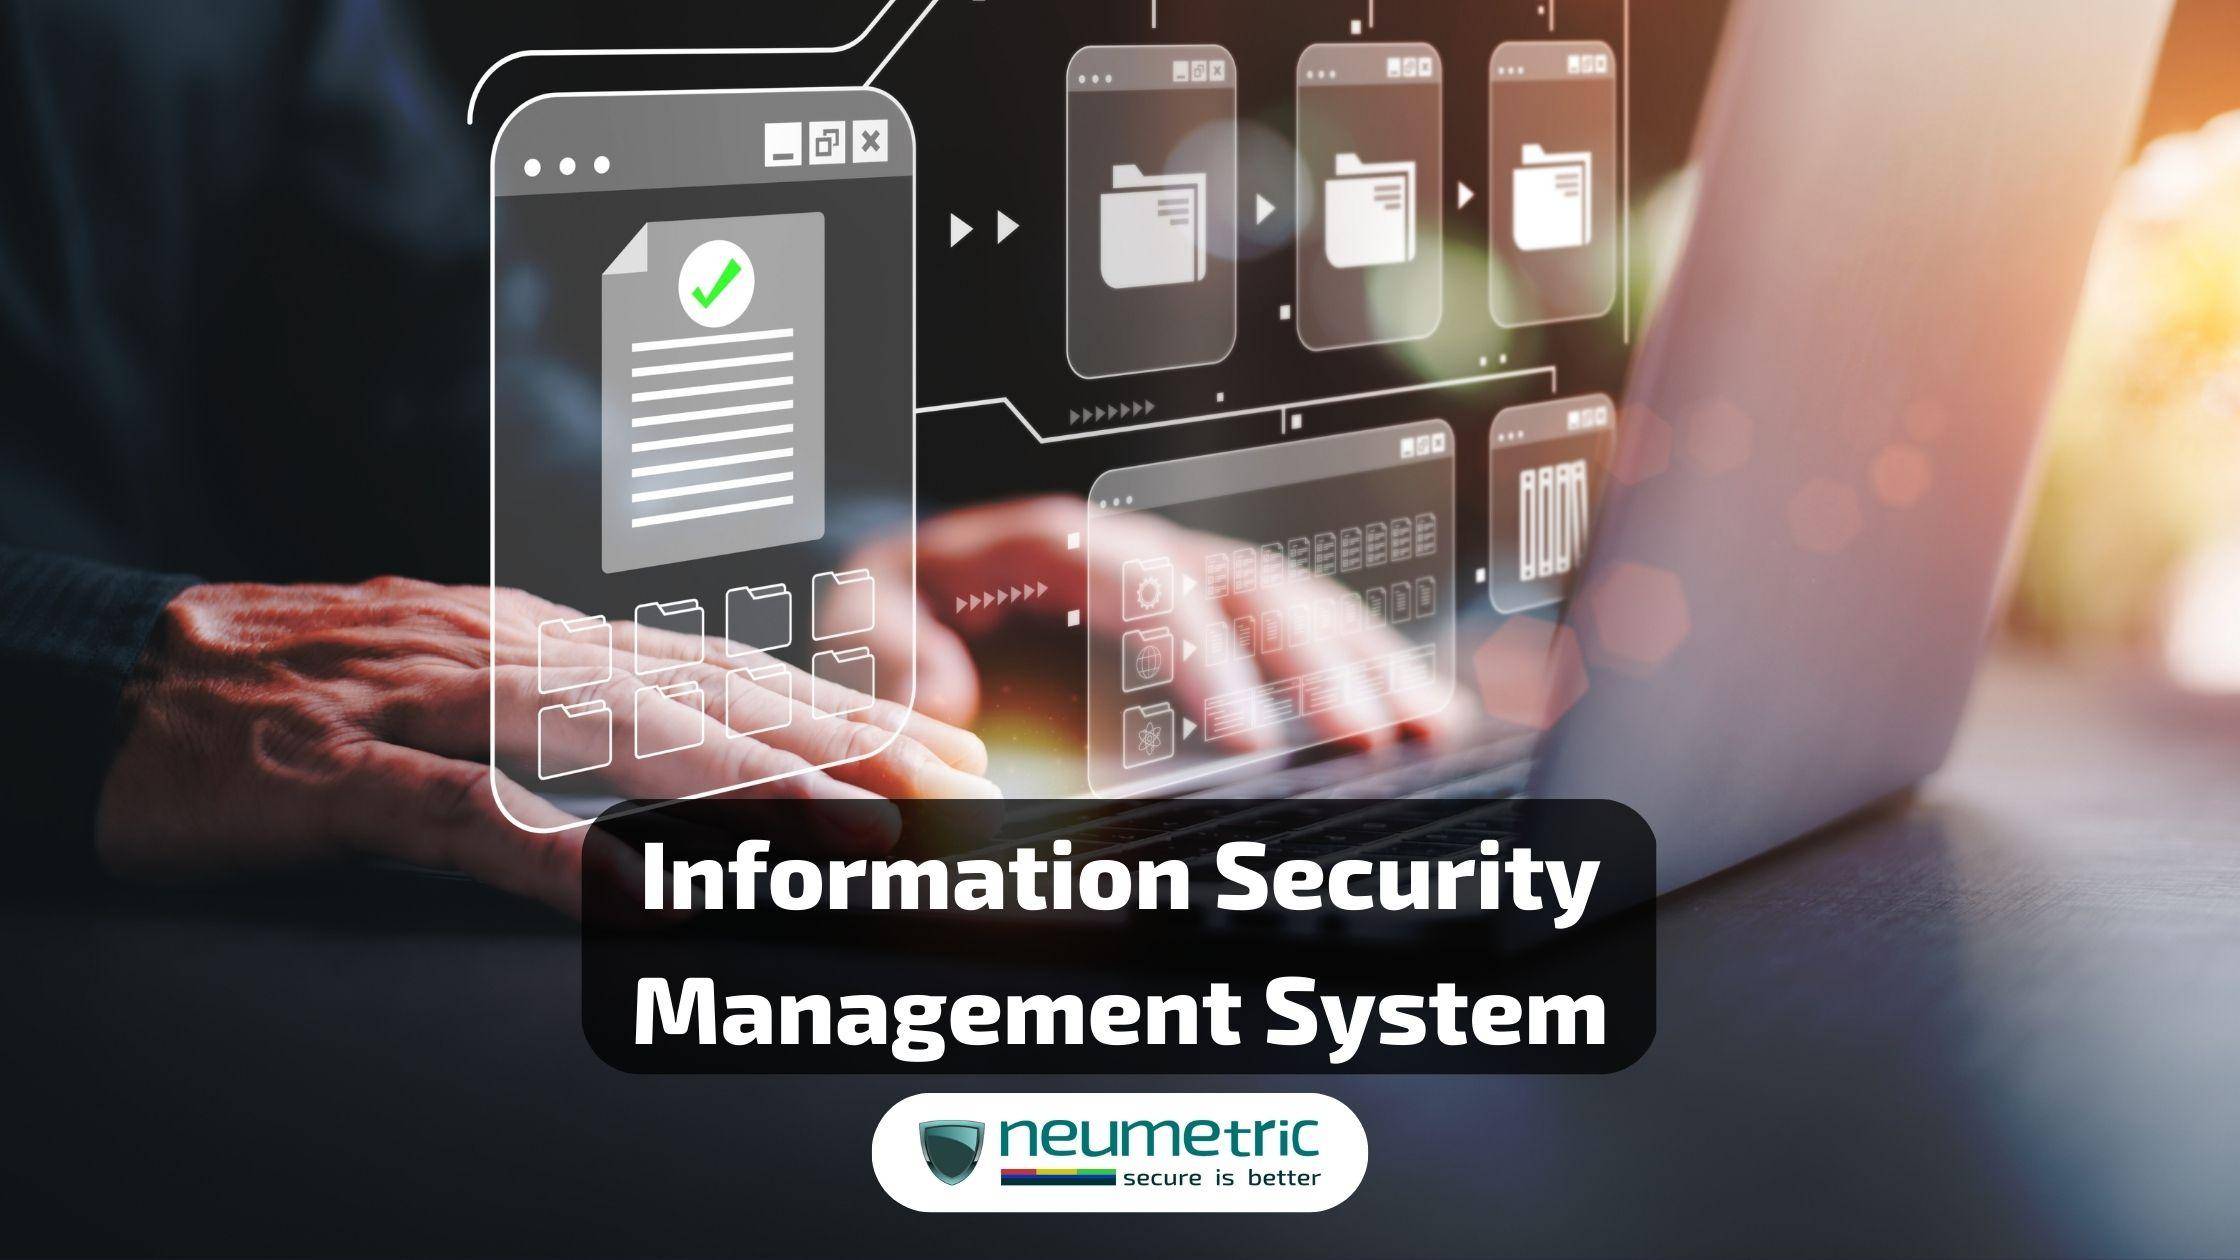 Information Security Management System | Neumetric